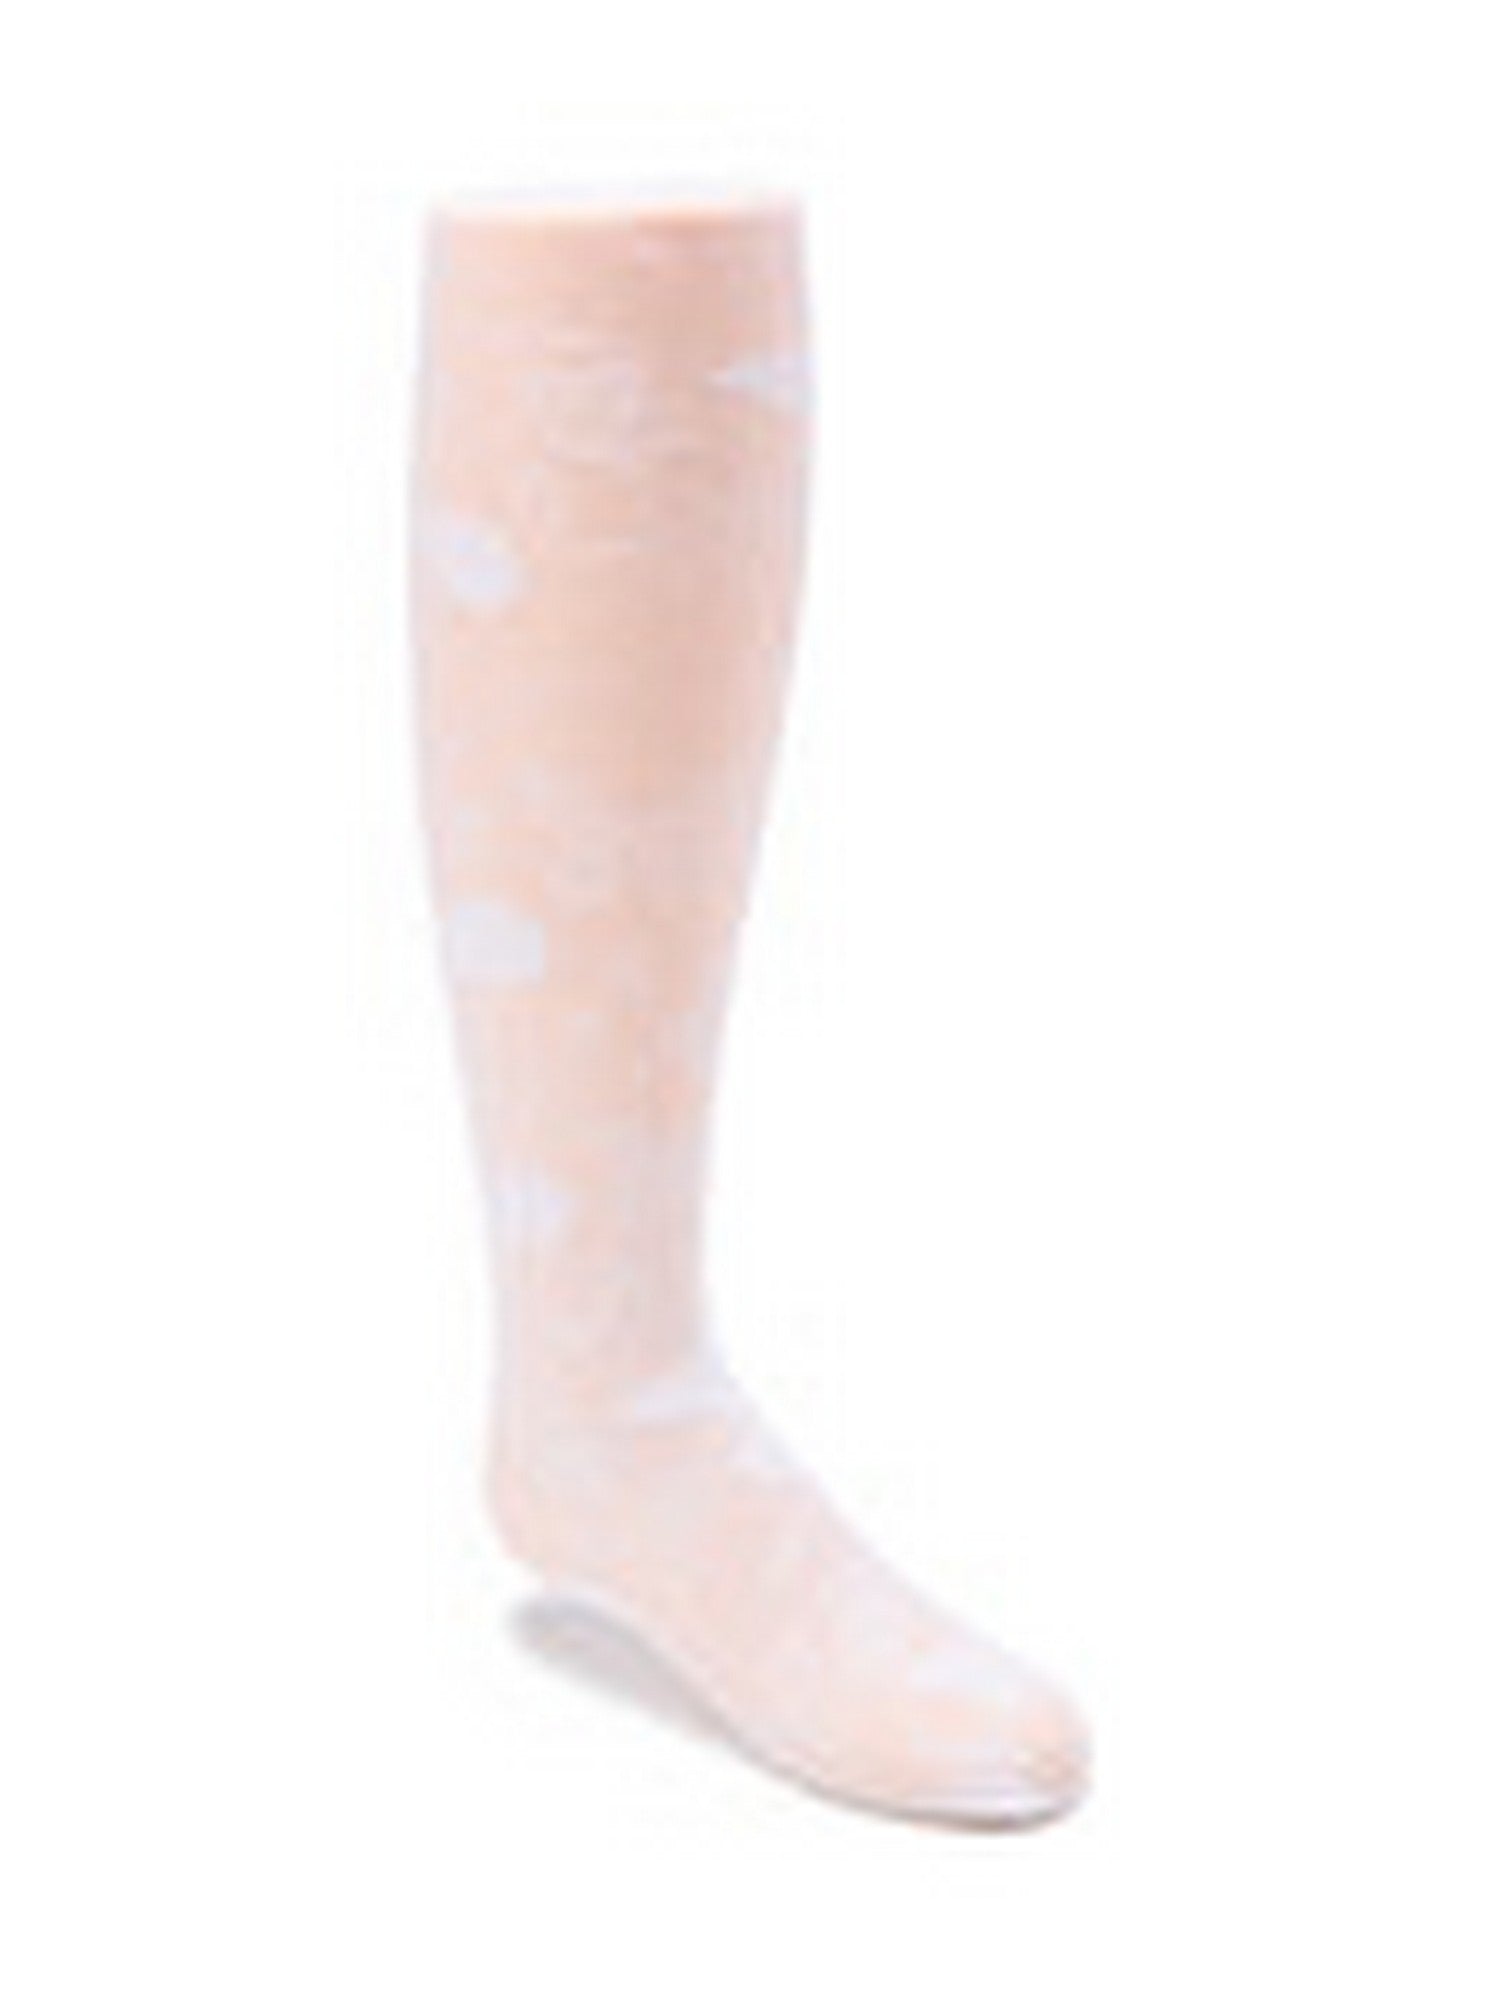 Wenchoice Little Girls White Jacquard Stretchy Soft Stylish Footed Tights 3-5